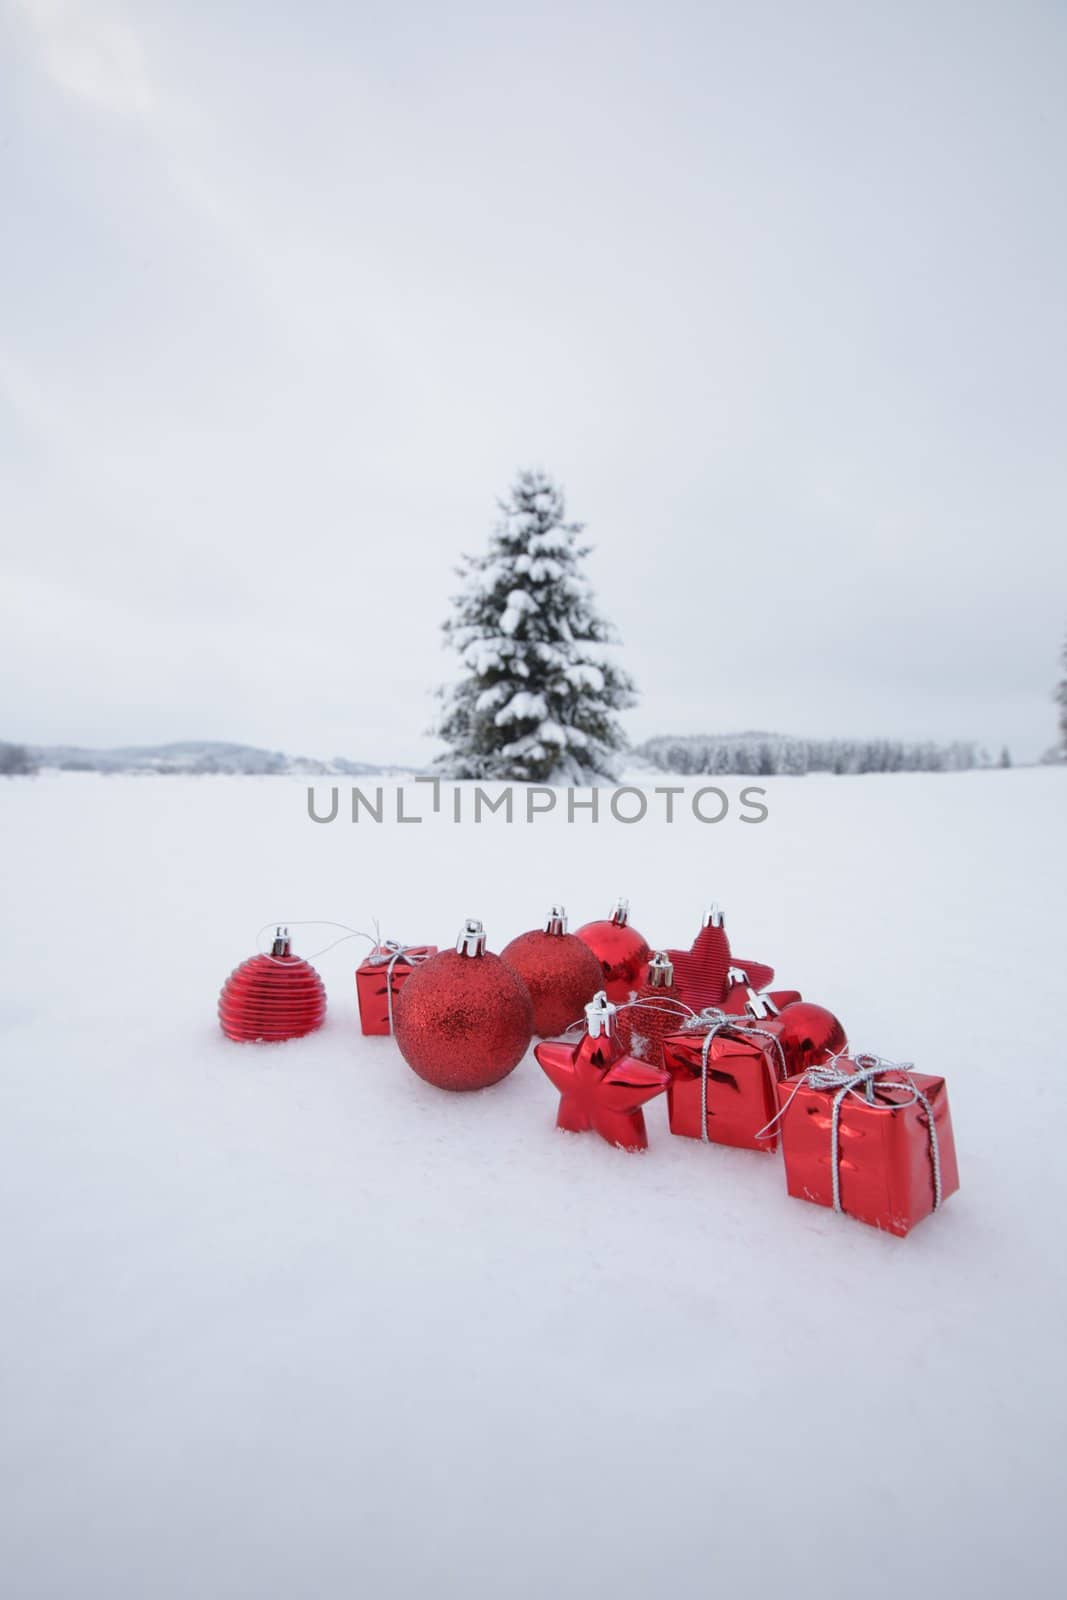 Christmas decoration outside in a snowy landscape